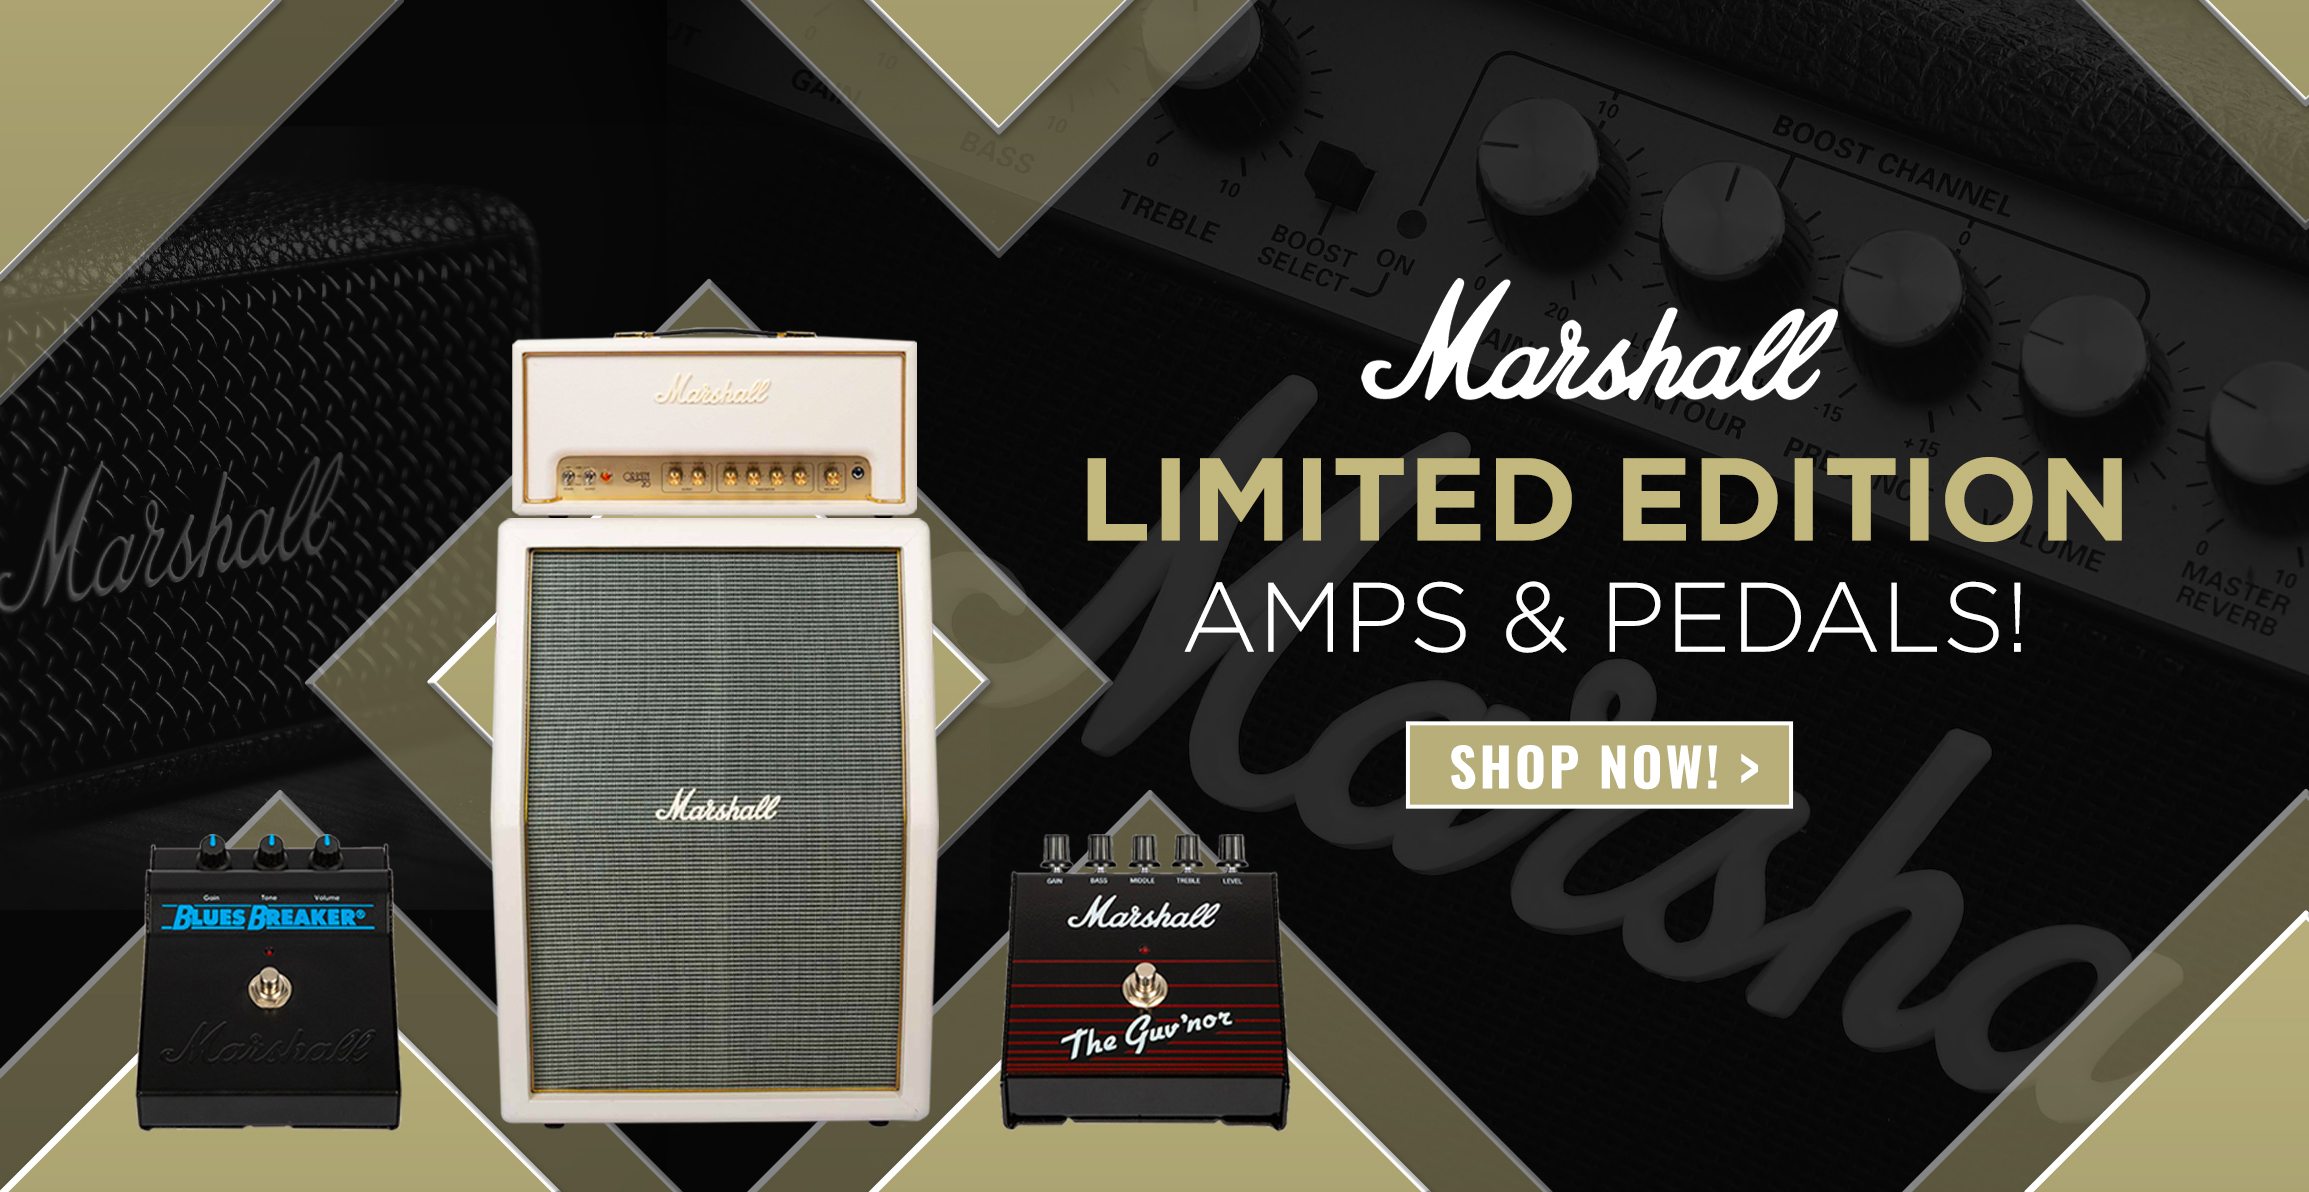 SHOP LIMITED EDITION MARSHALL AMPS AND PEDALS!